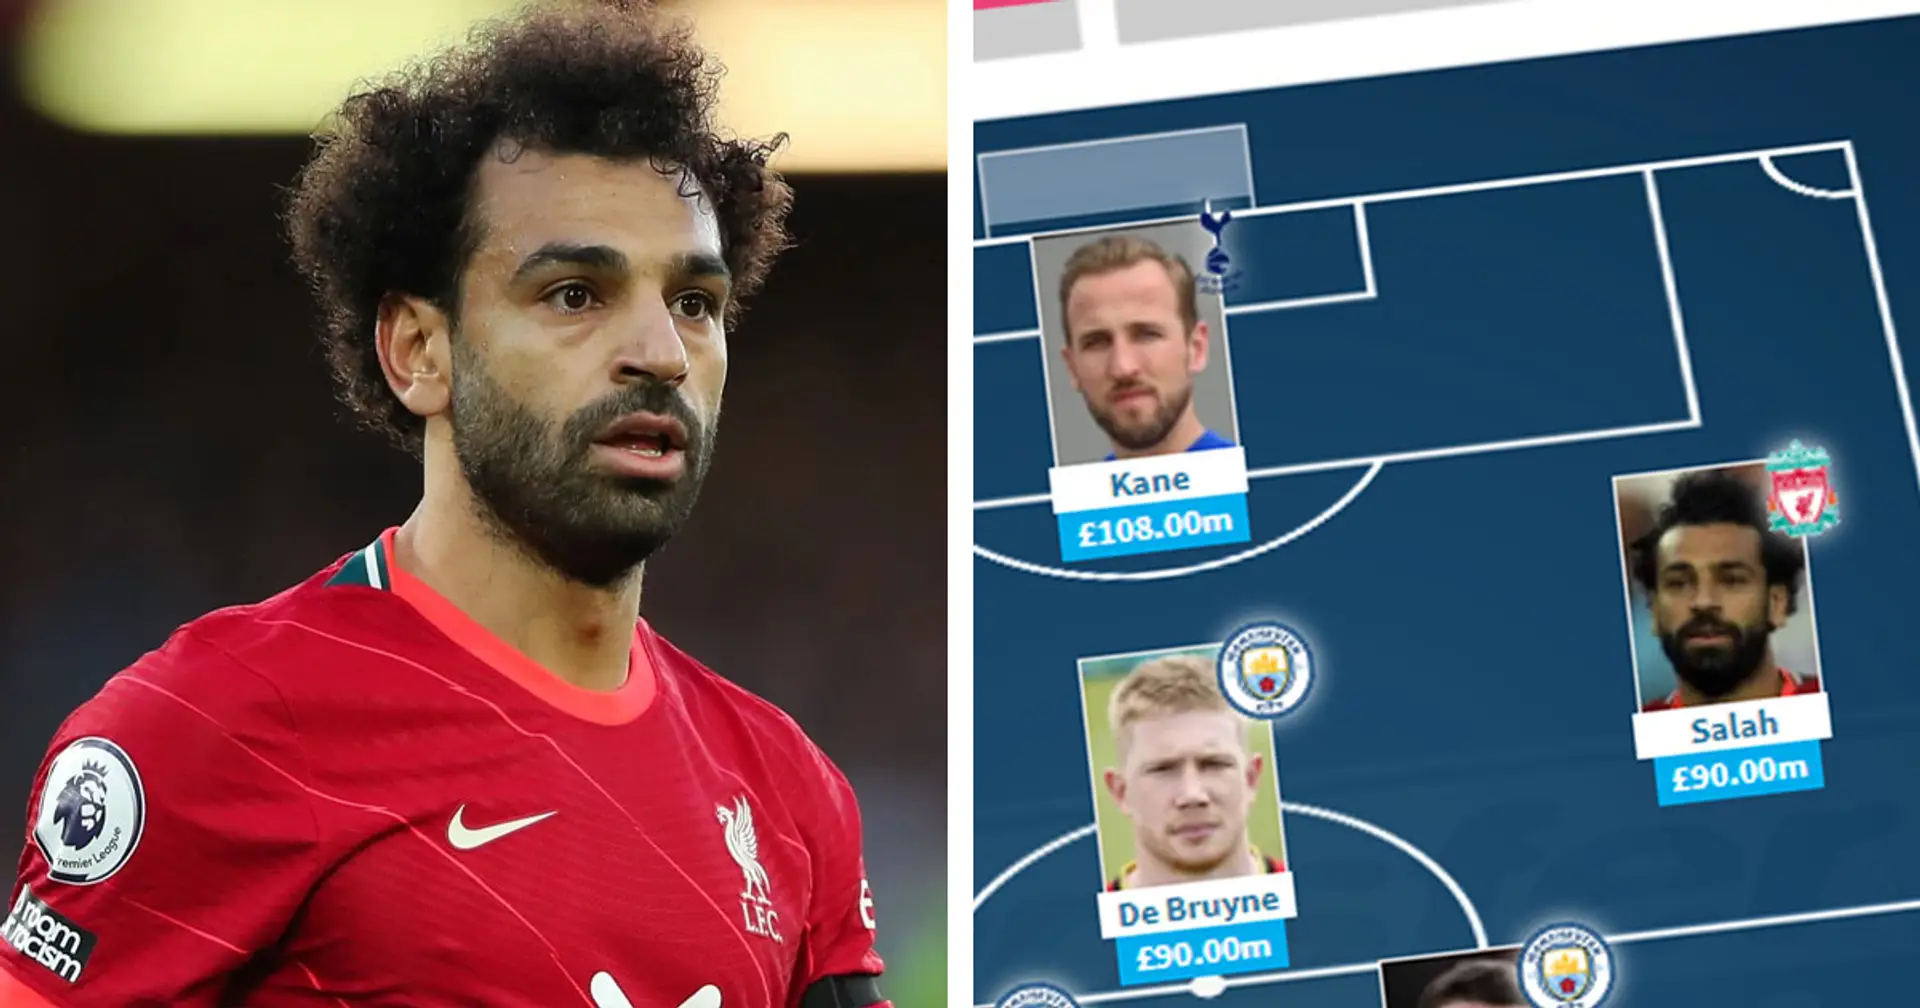 Salah in, no Chelsea player included: Most expensive Premier League XI revealed